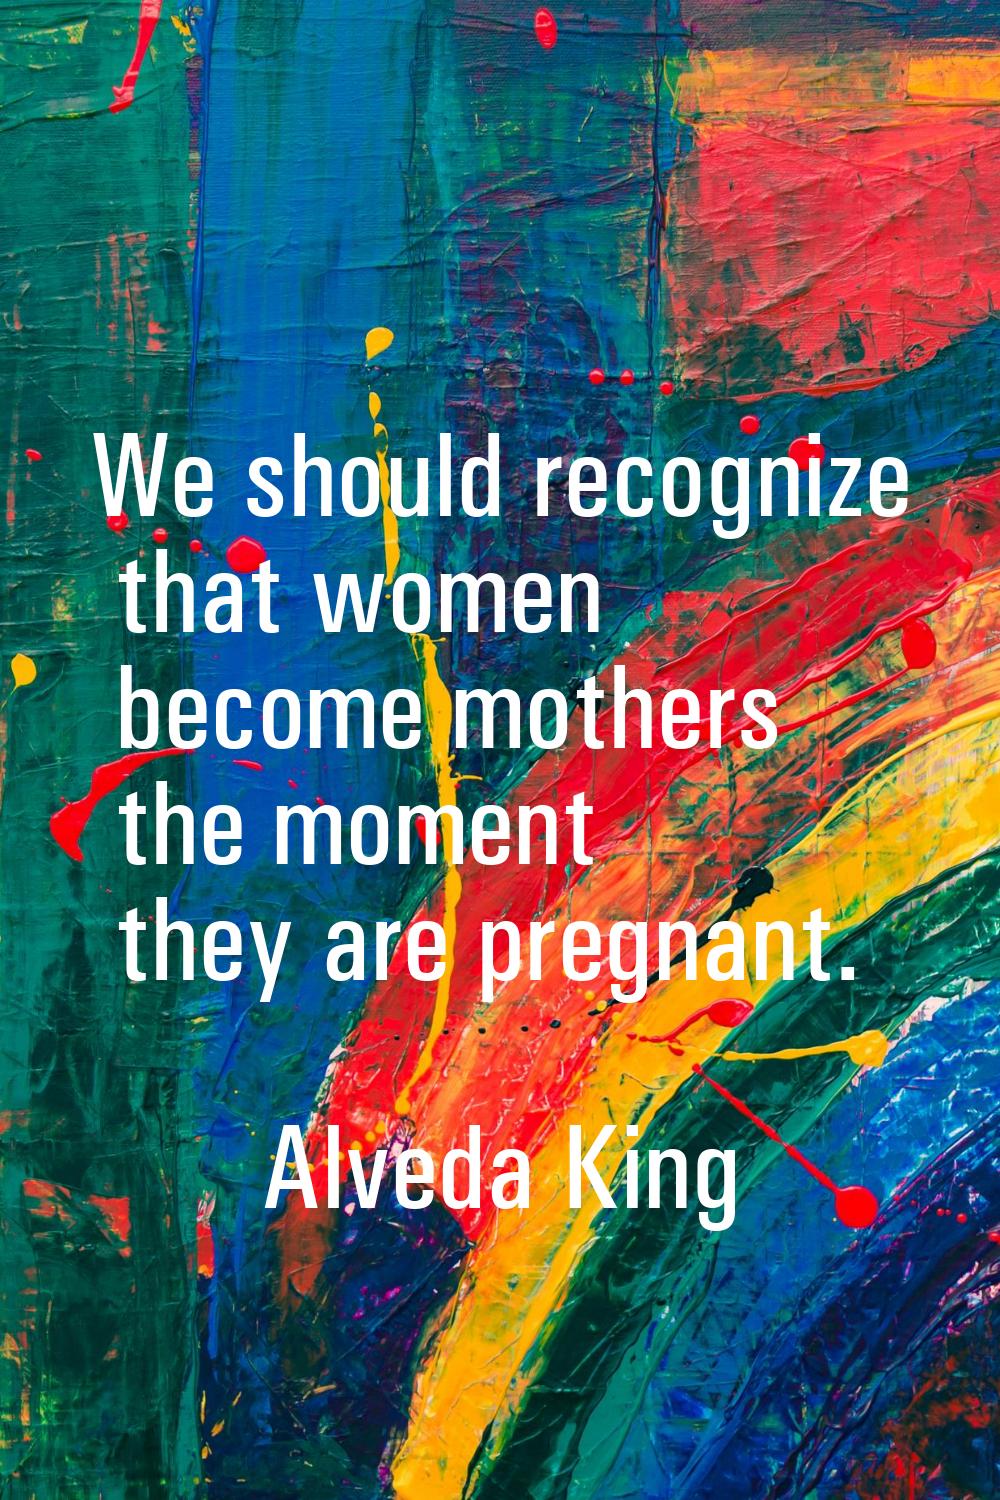 We should recognize that women become mothers the moment they are pregnant.